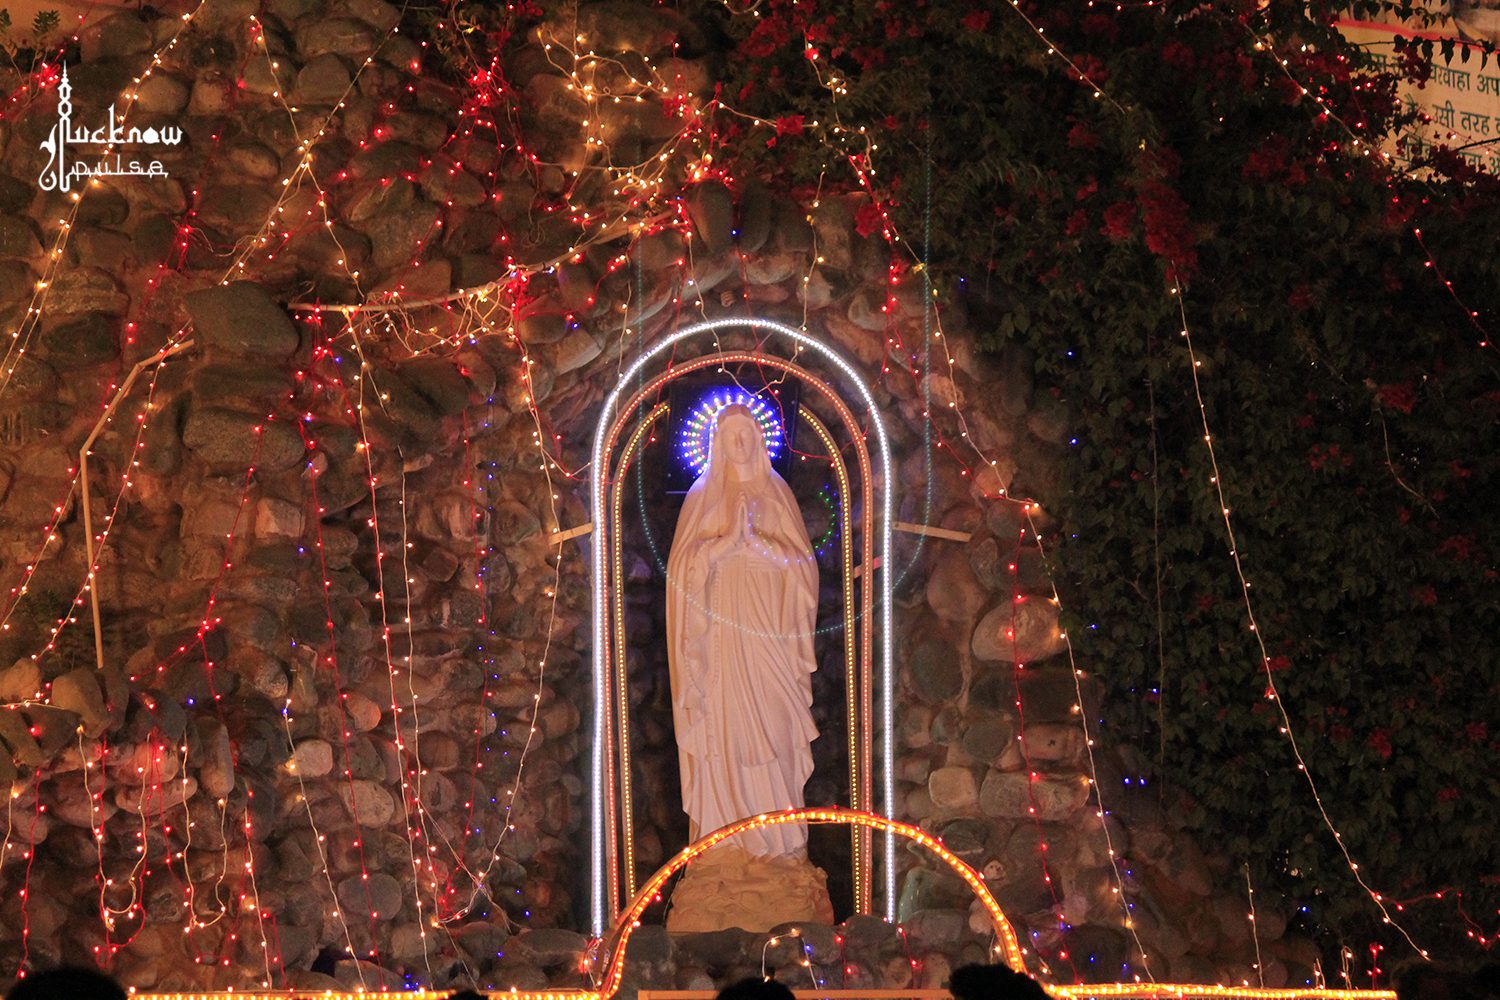 Christmas decor at CATHEDRAL LUCKNOW